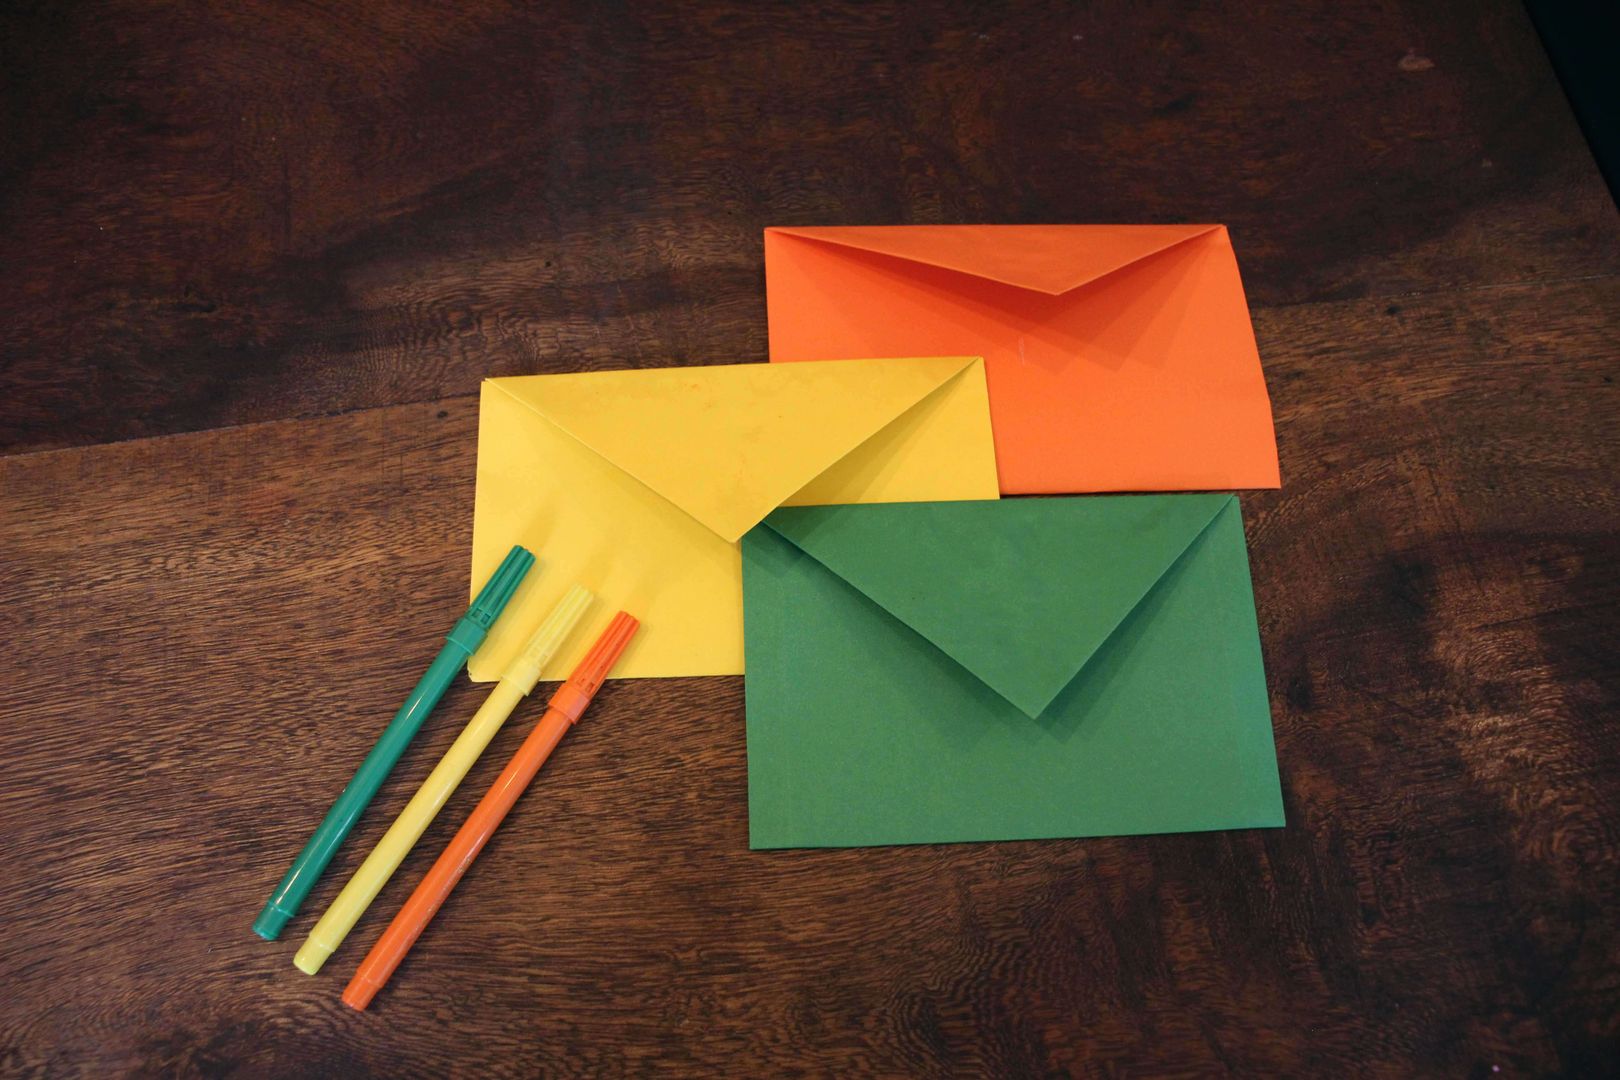 Origami Envelope Making Tutorial - DIY Paper Envelope with Leaf  How to  make an easy origami envelope with leaf. Paper envelope origami instructions  step by step. Beginners can make this easy